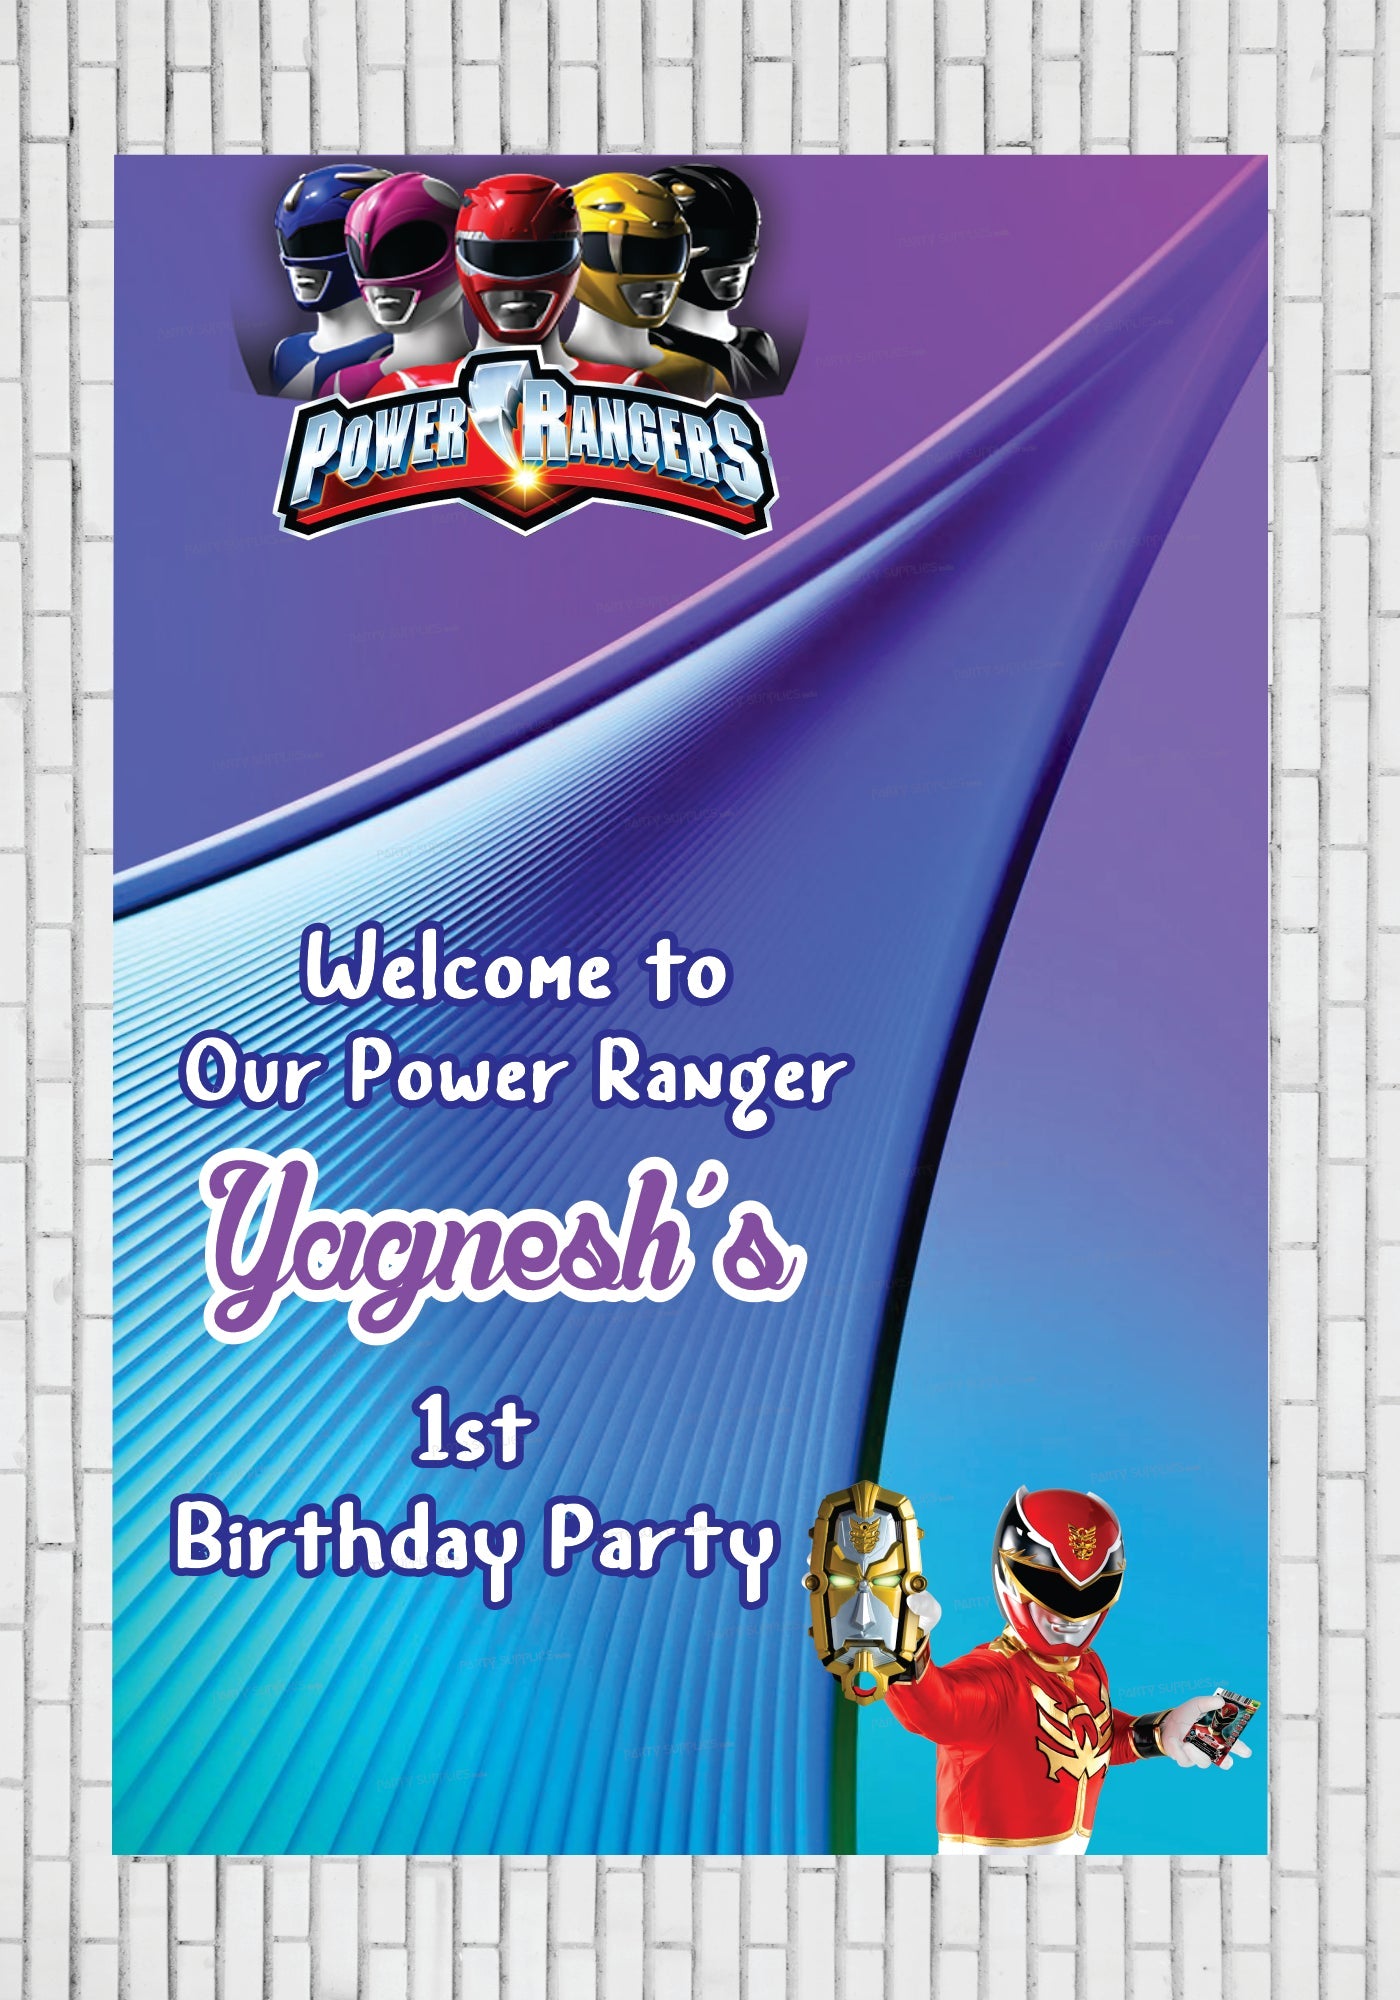 PSI Power Rangers Theme  Customized Welcome Board